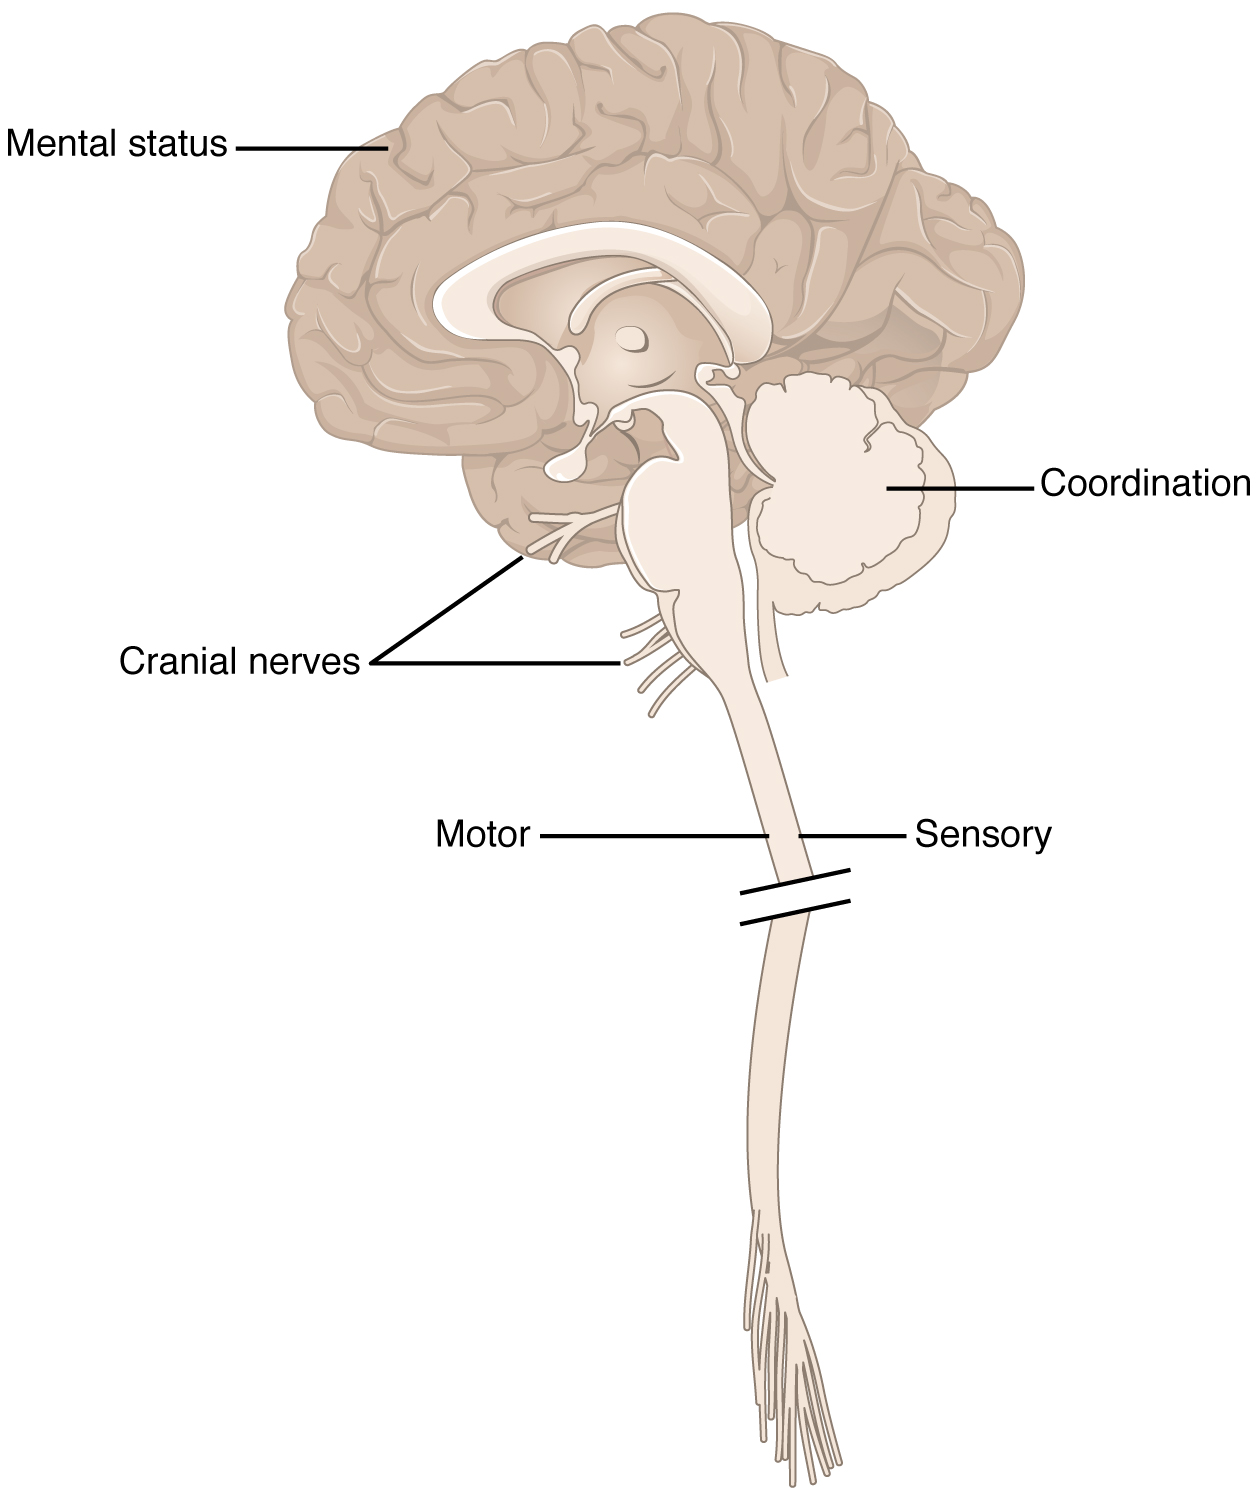 This figure shows a picture of the brain connected to the spinal cord.